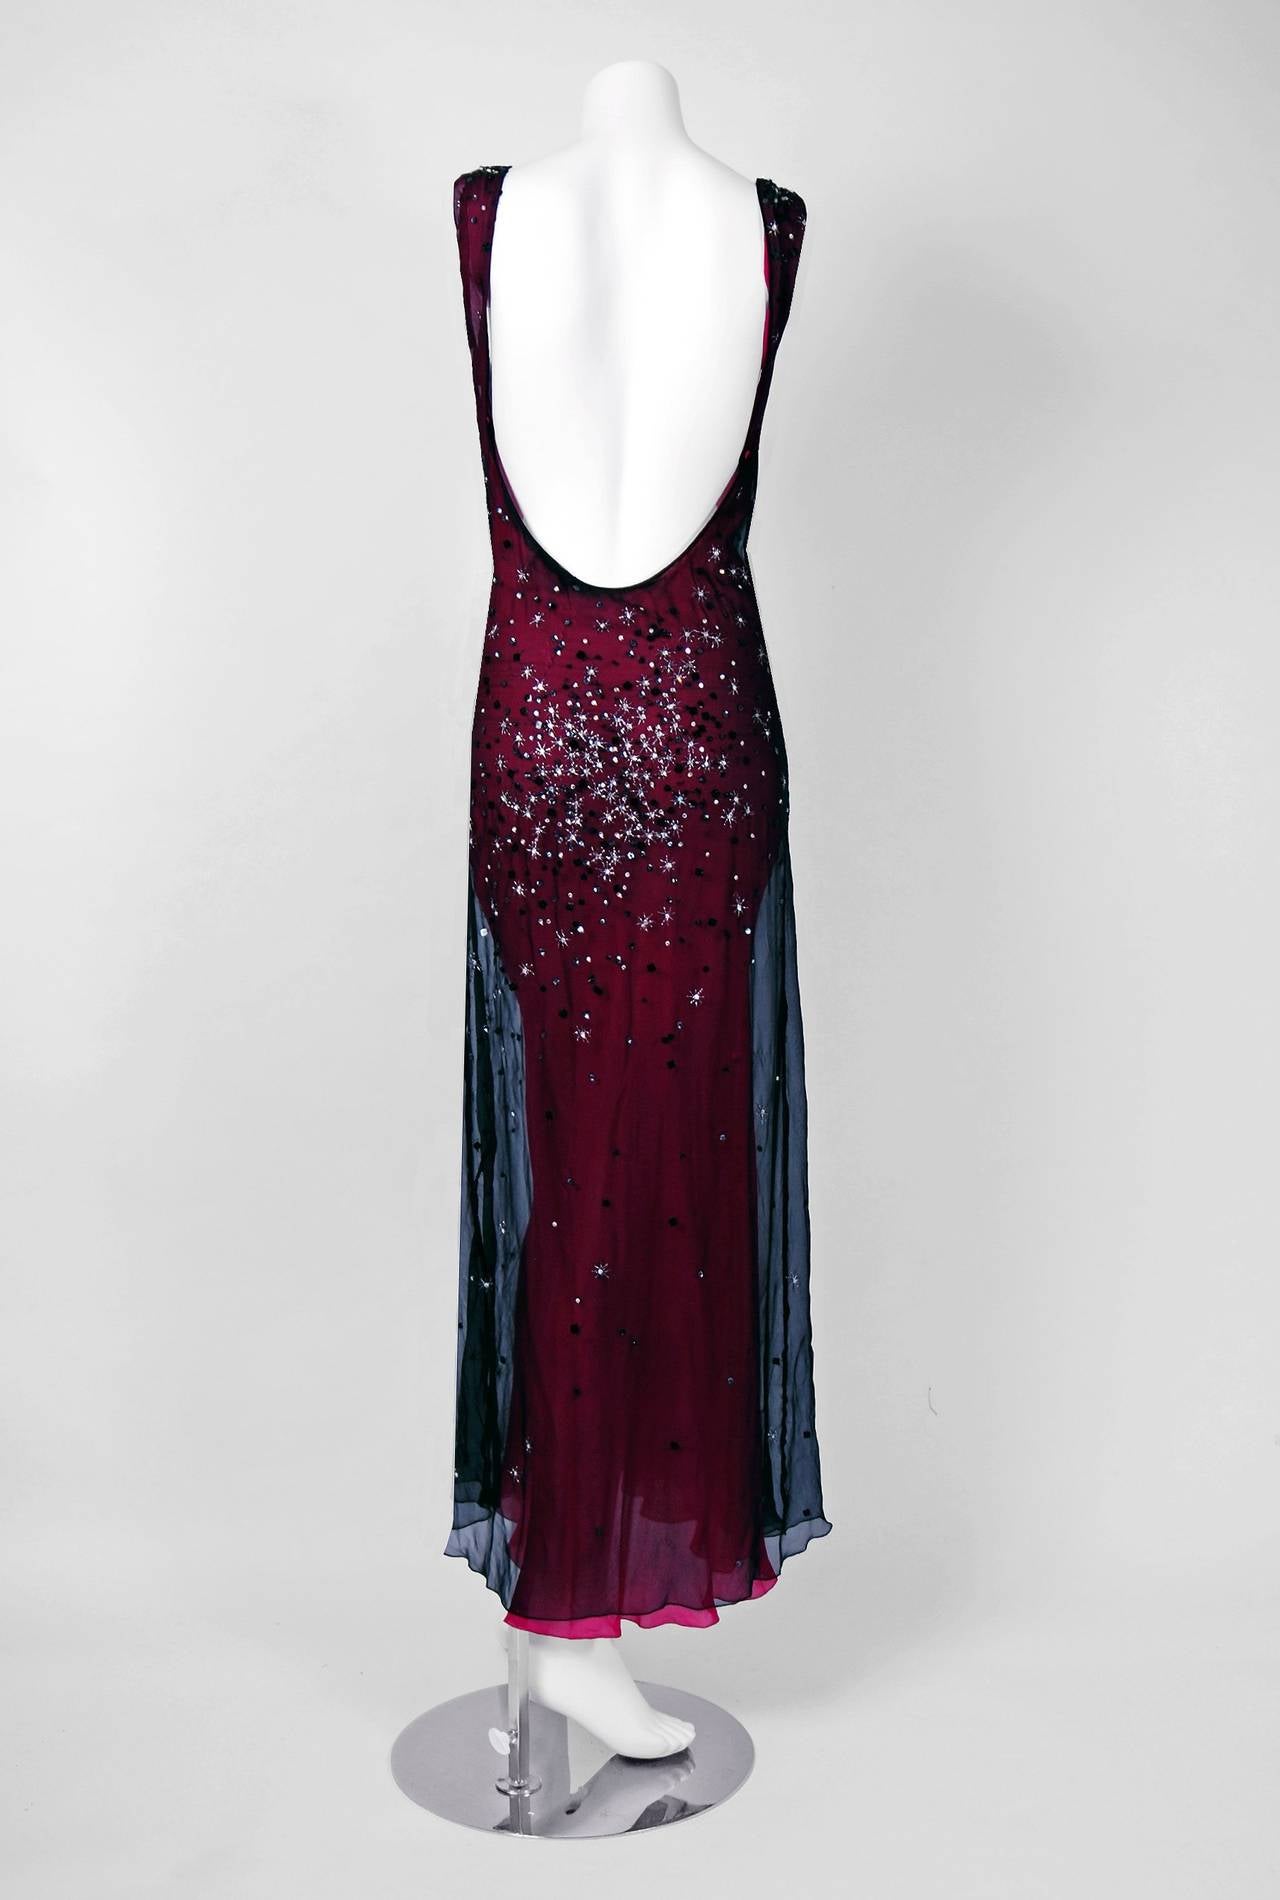 1990's Gianni Versace Couture Black & Fuchsia Beaded Silk Illusion Backless Gown 1